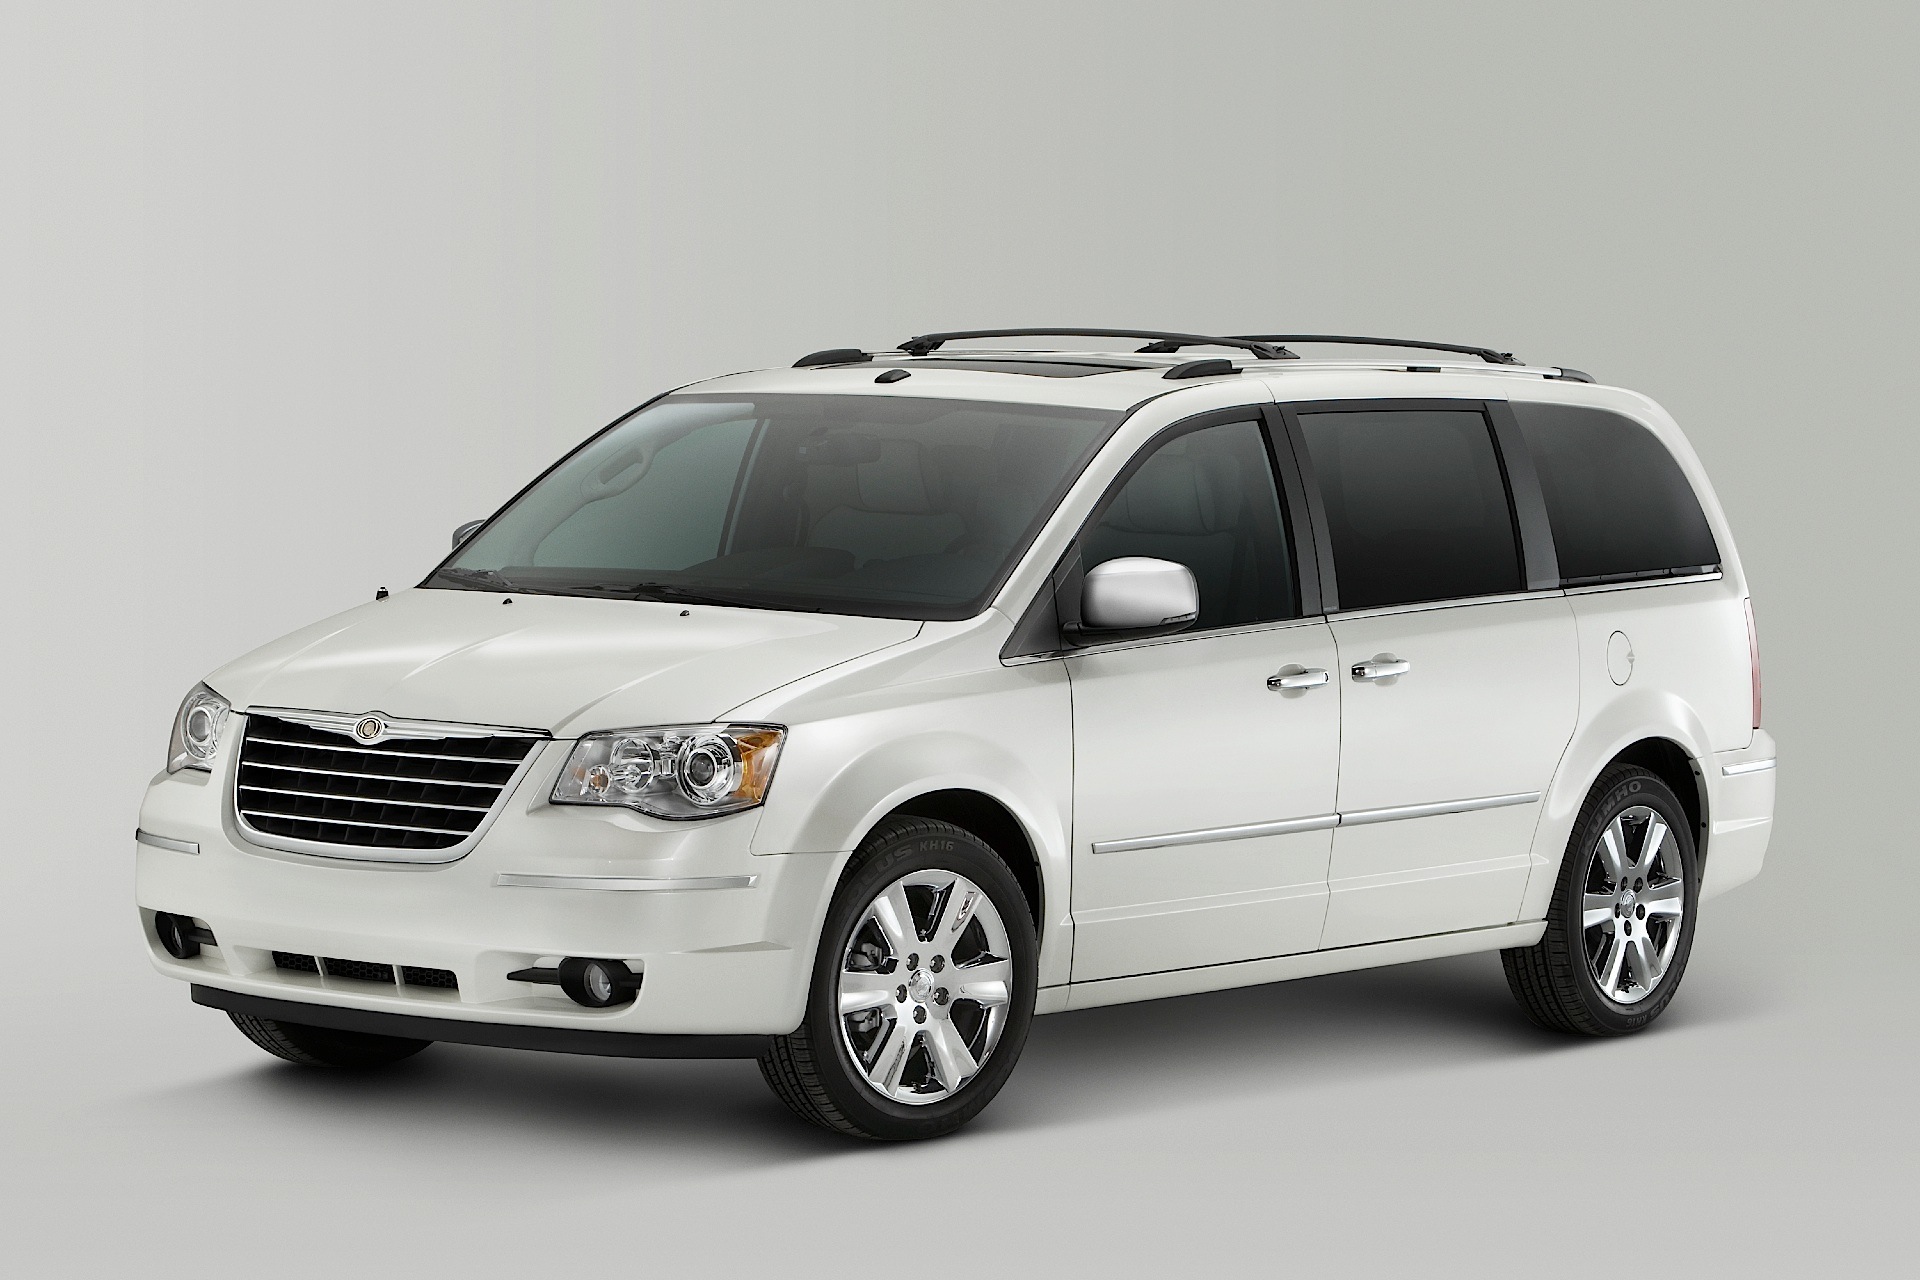 Chrysler town and country weight #1